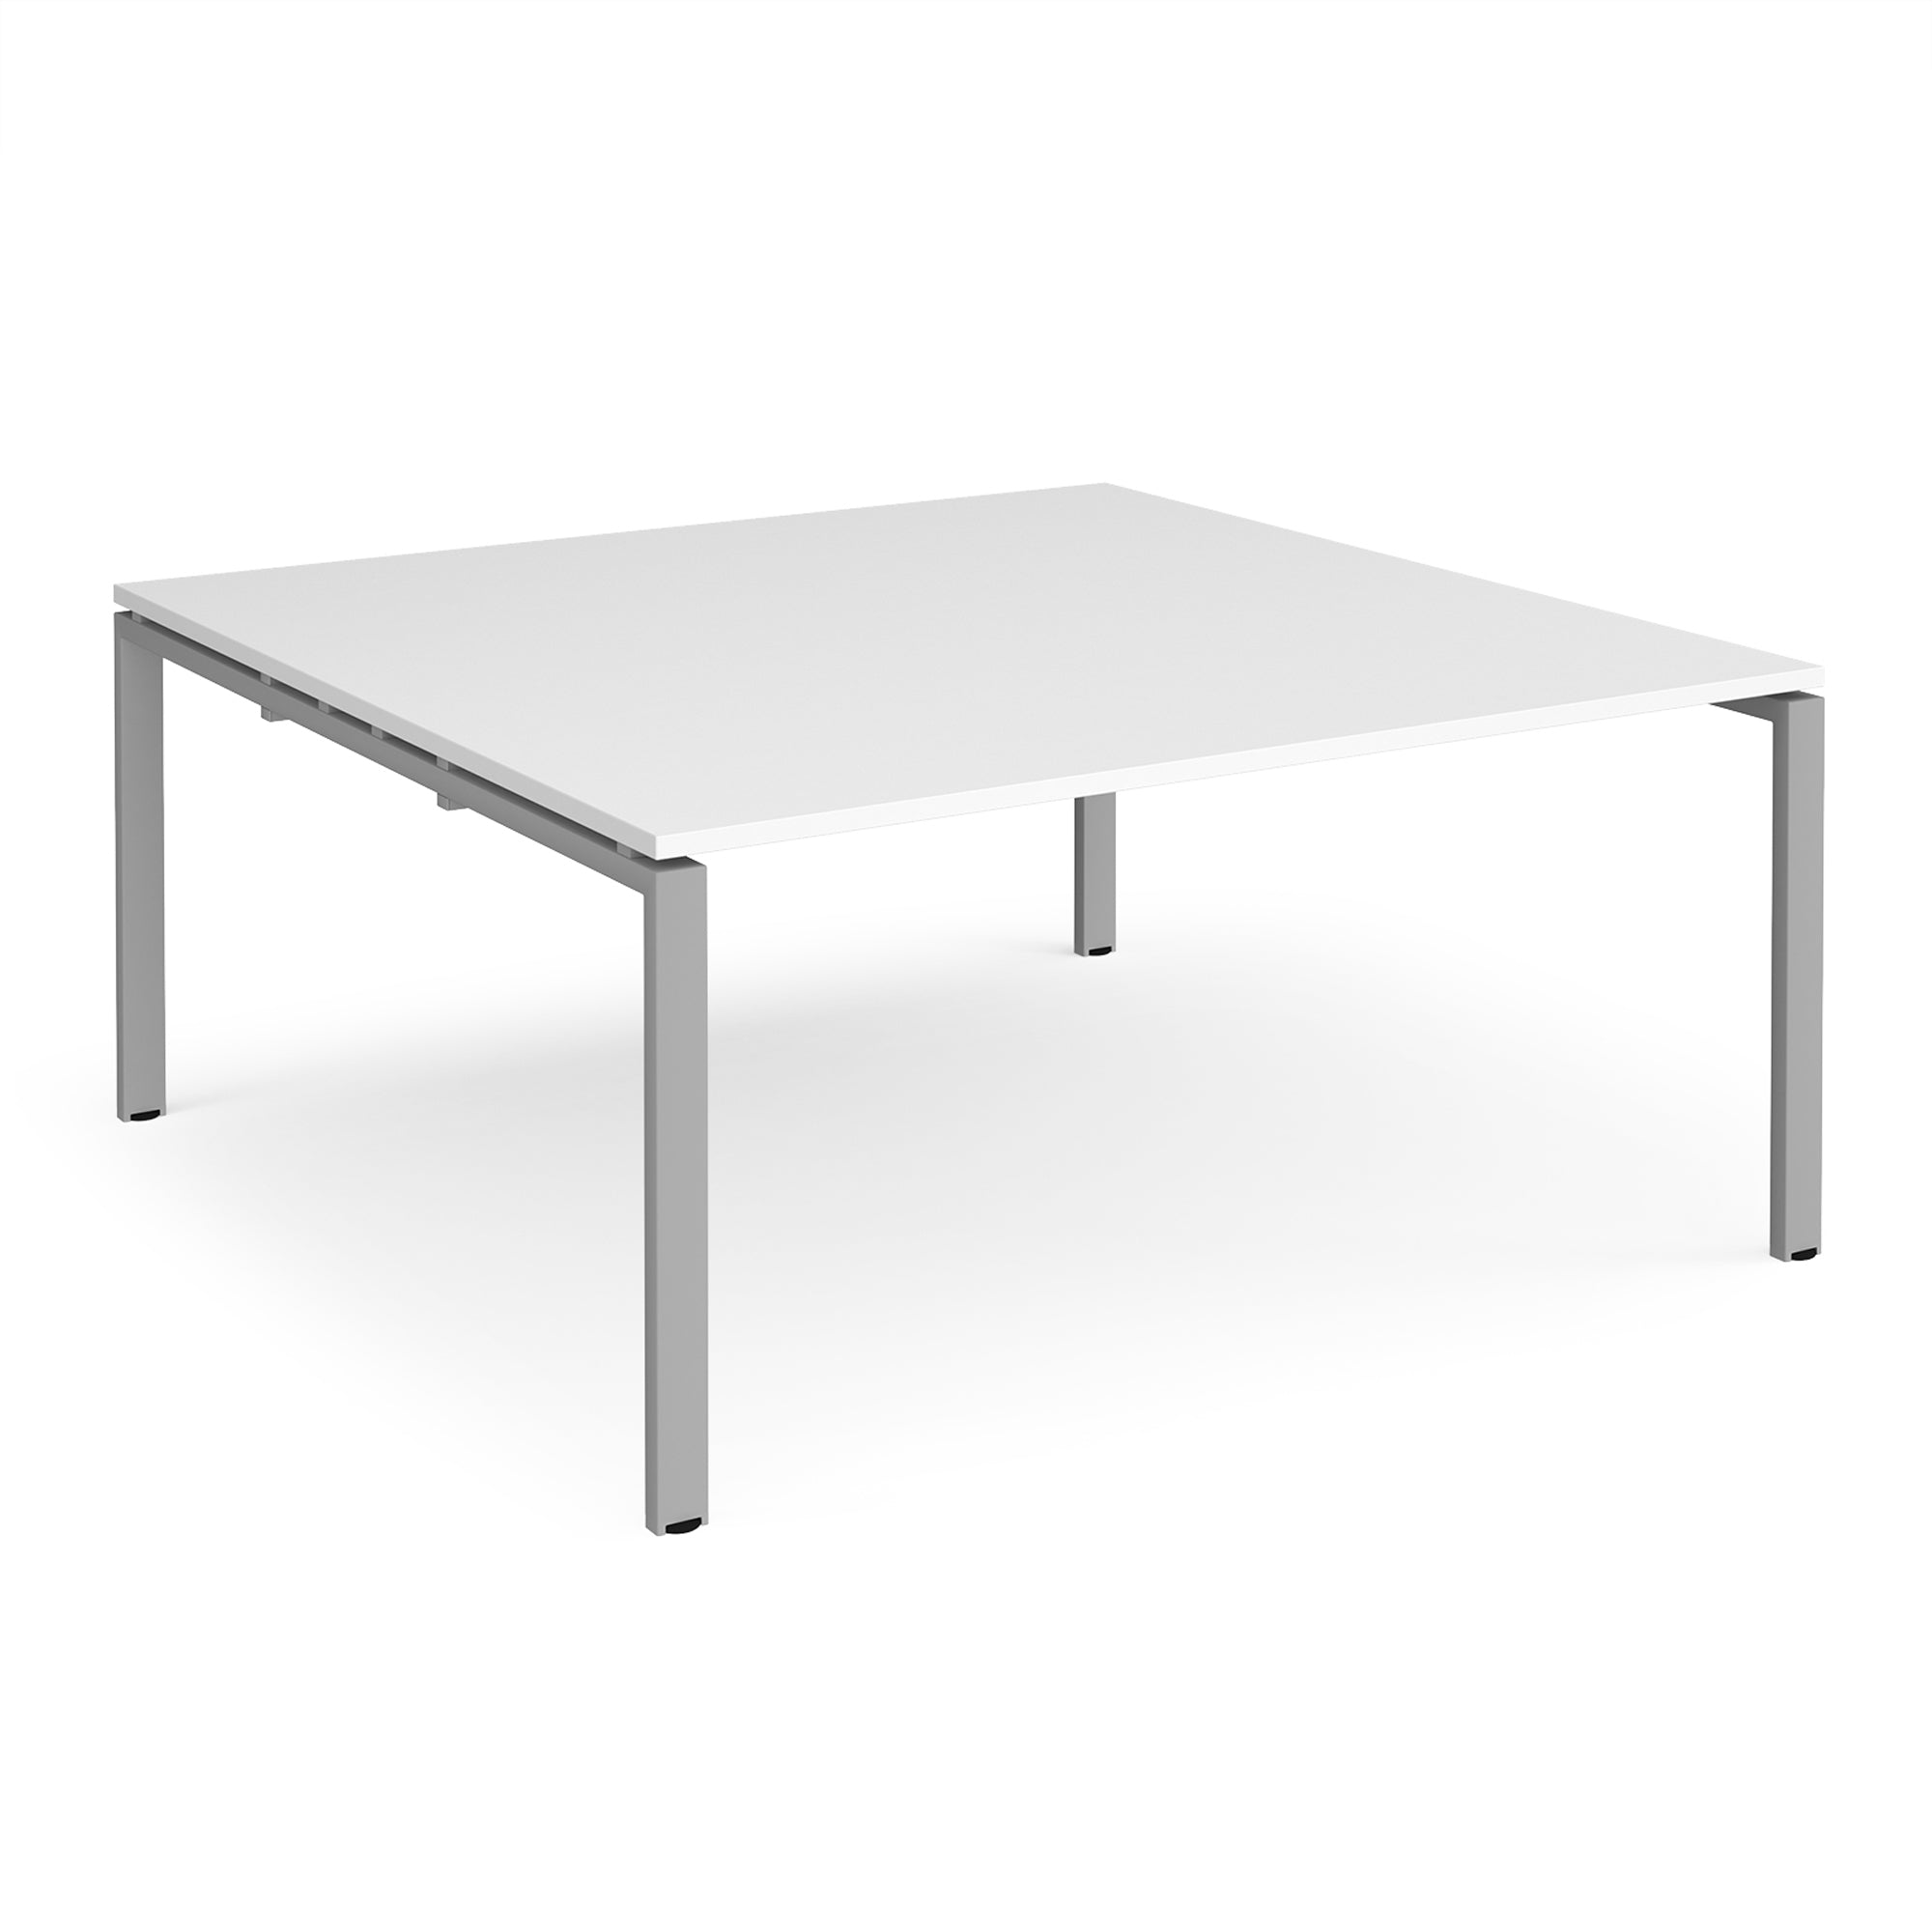 Adapt boardroom table starter unit - Office Products Online